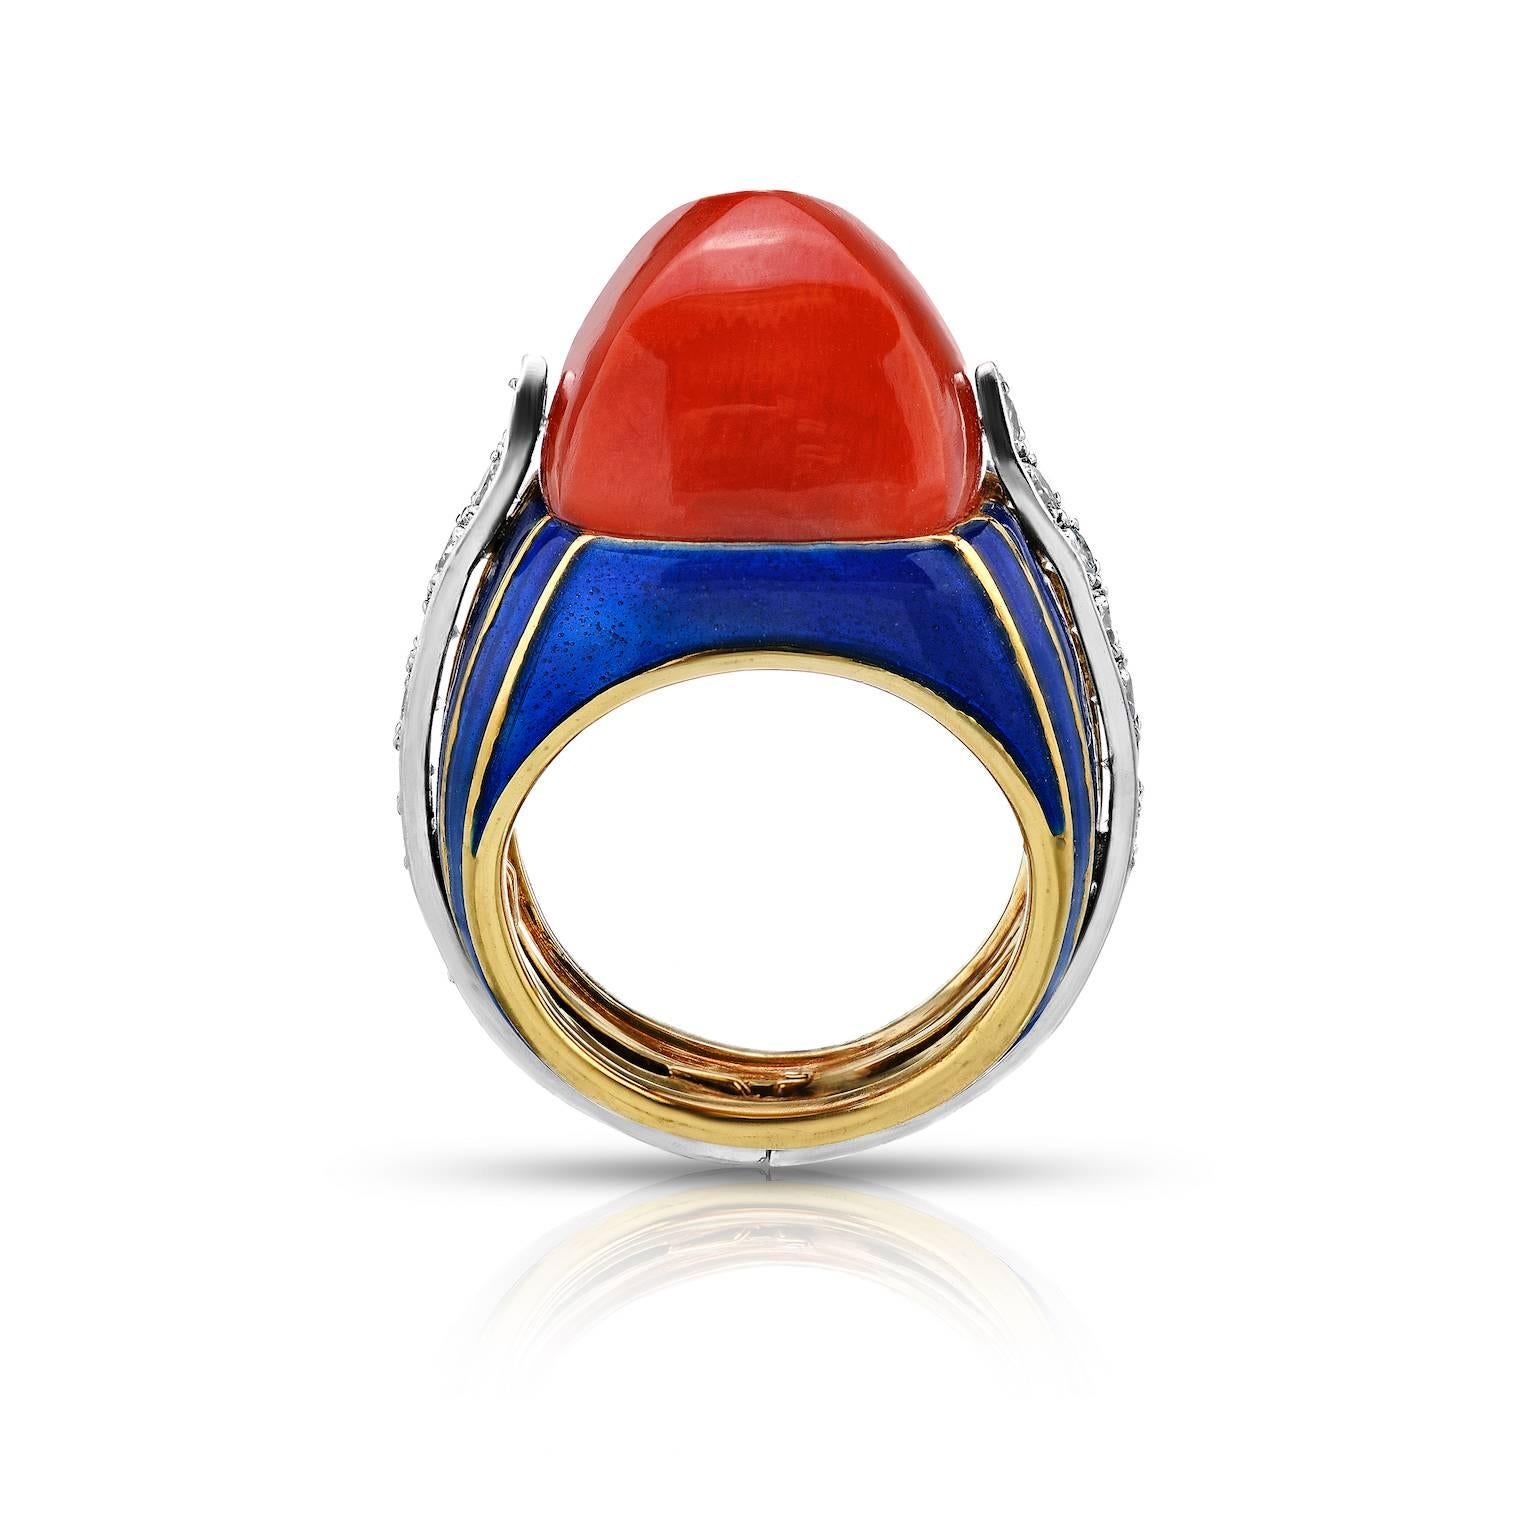 A coral, diamond and enamel ring,
Donald Claflin for Tiffany & Co., circa 1970

A coral, diamond and enamel ring, Donald Claflin for Tiffany & Co., circa 1970
centering a sugarloaf cabochon coral, measuring approximately 14.5 x 13.9mm, with a blue